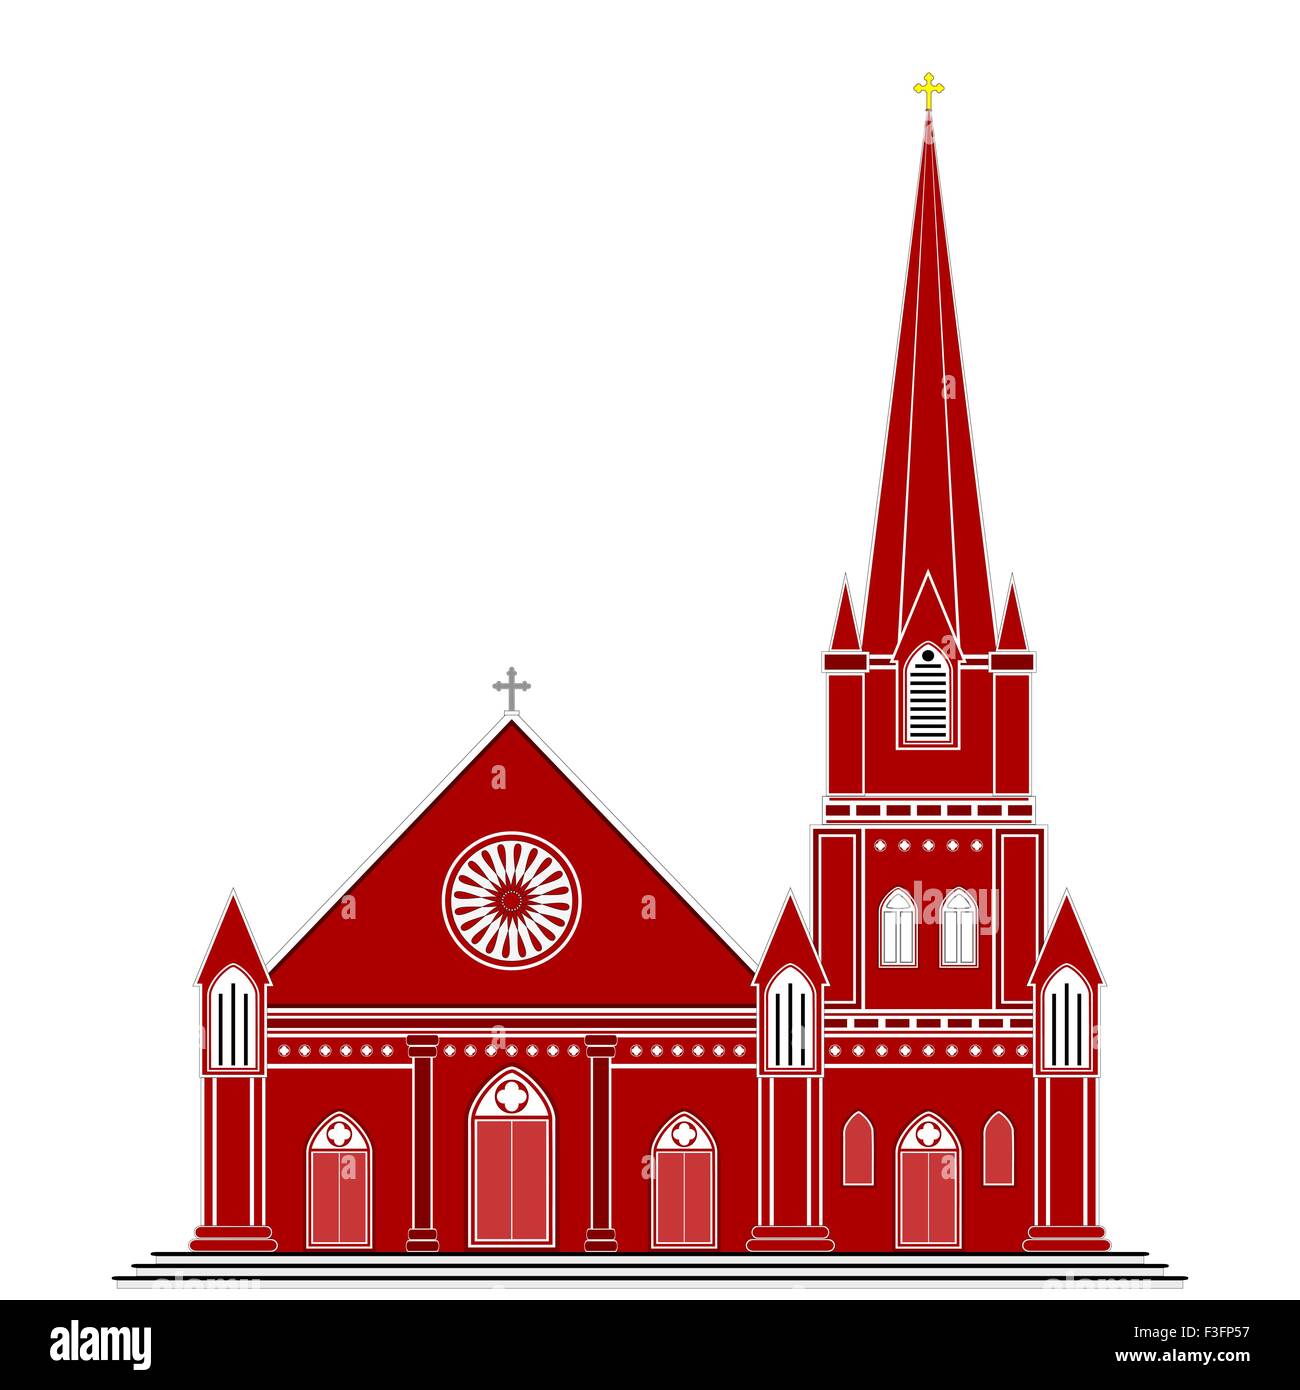 An ancient gothic style Christian church with a tower. Shades of maroon, red and brown are used. The image is isolated on white. Stock Vector